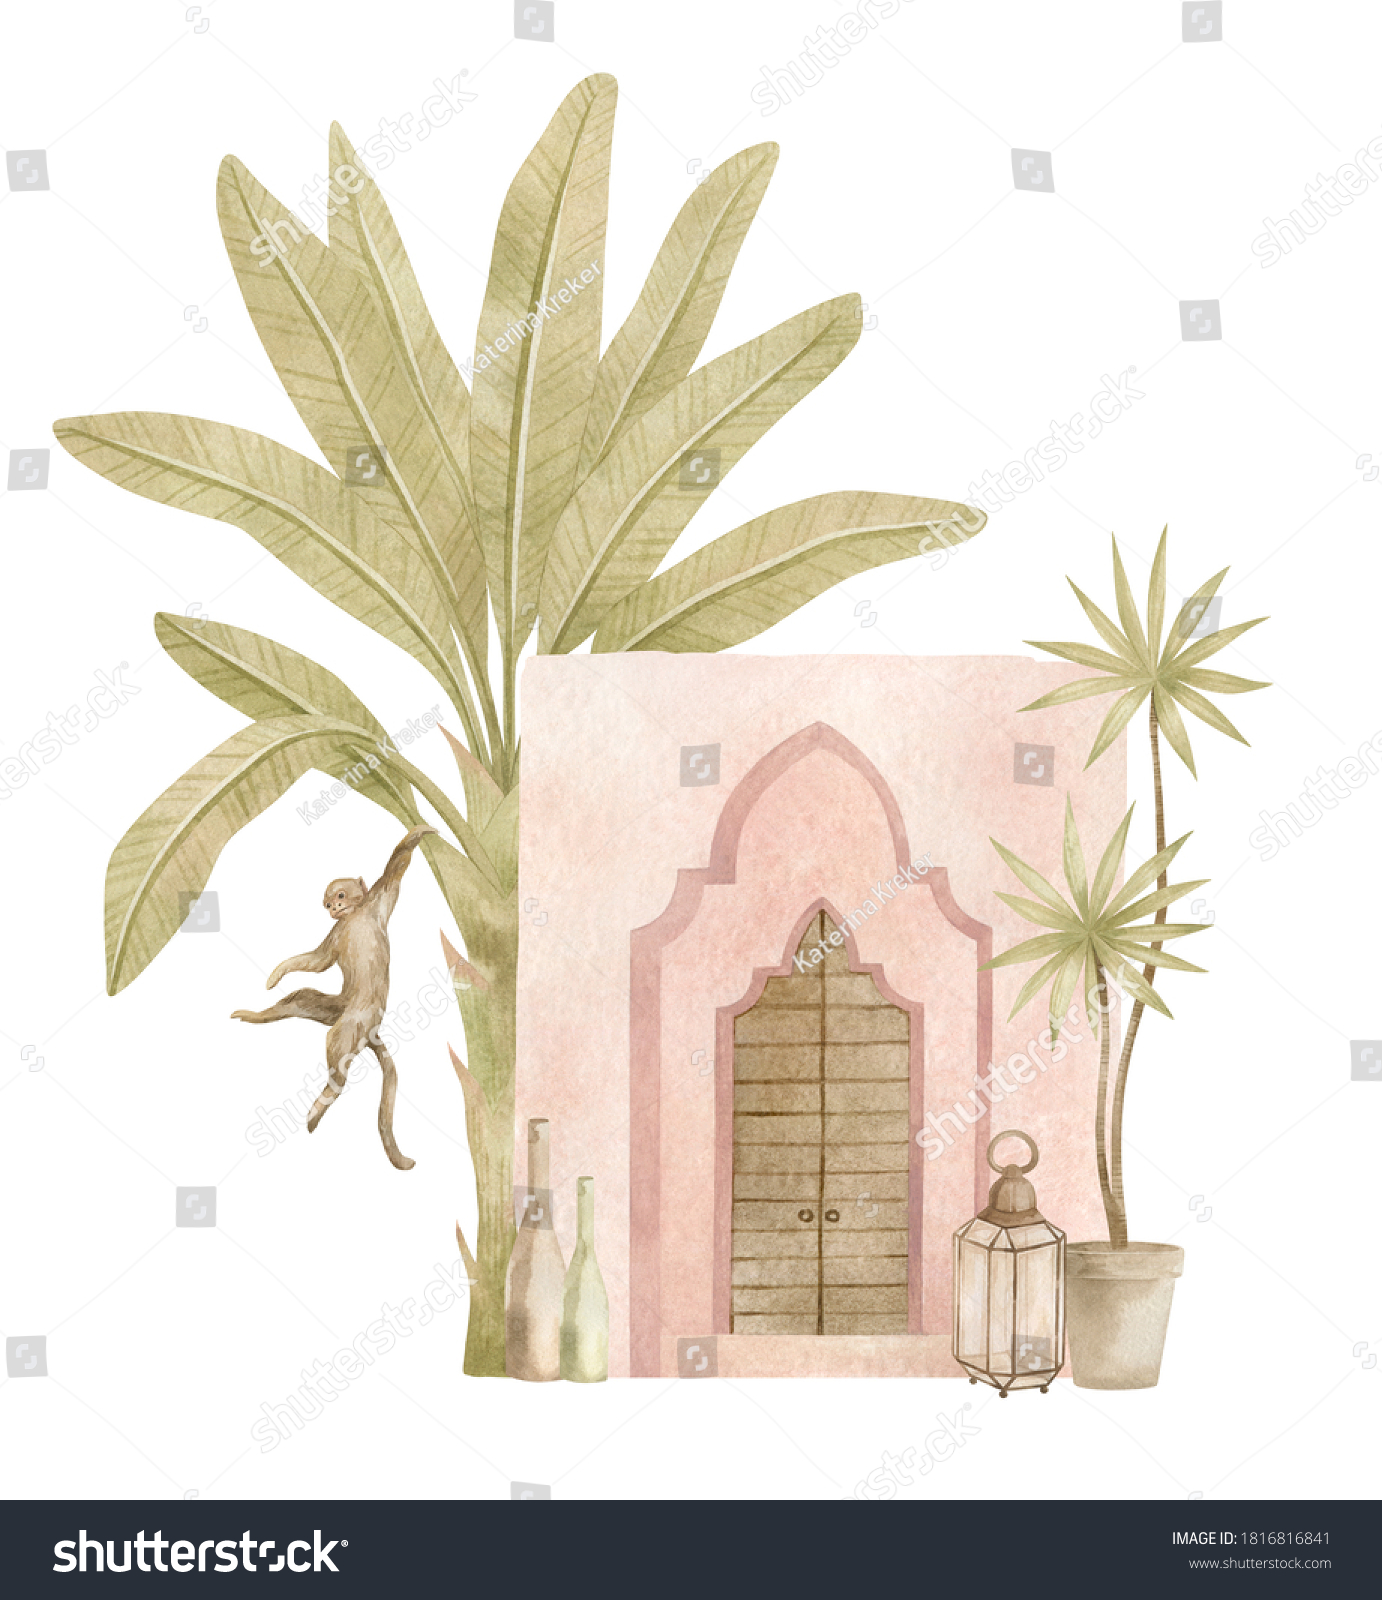 7,450 Moroccan palm trees Images, Stock Photos & Vectors | Shutterstock